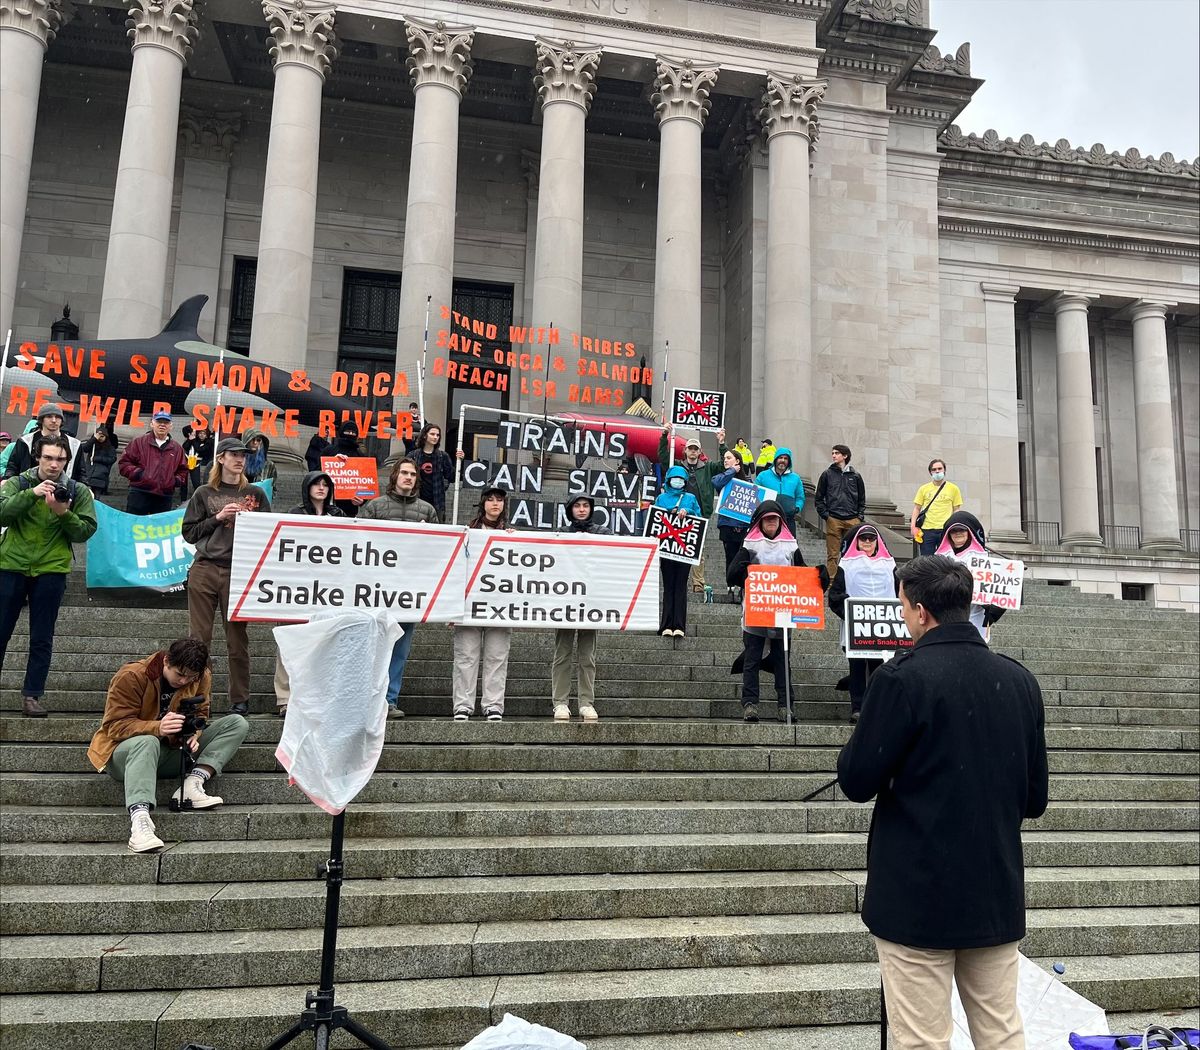 Rep. Alex Ramel, D-Bellingham, addresses the crowd of demonstrators on the steps of the Capitol building.  (Elena Perry / The Spokesman-Review)